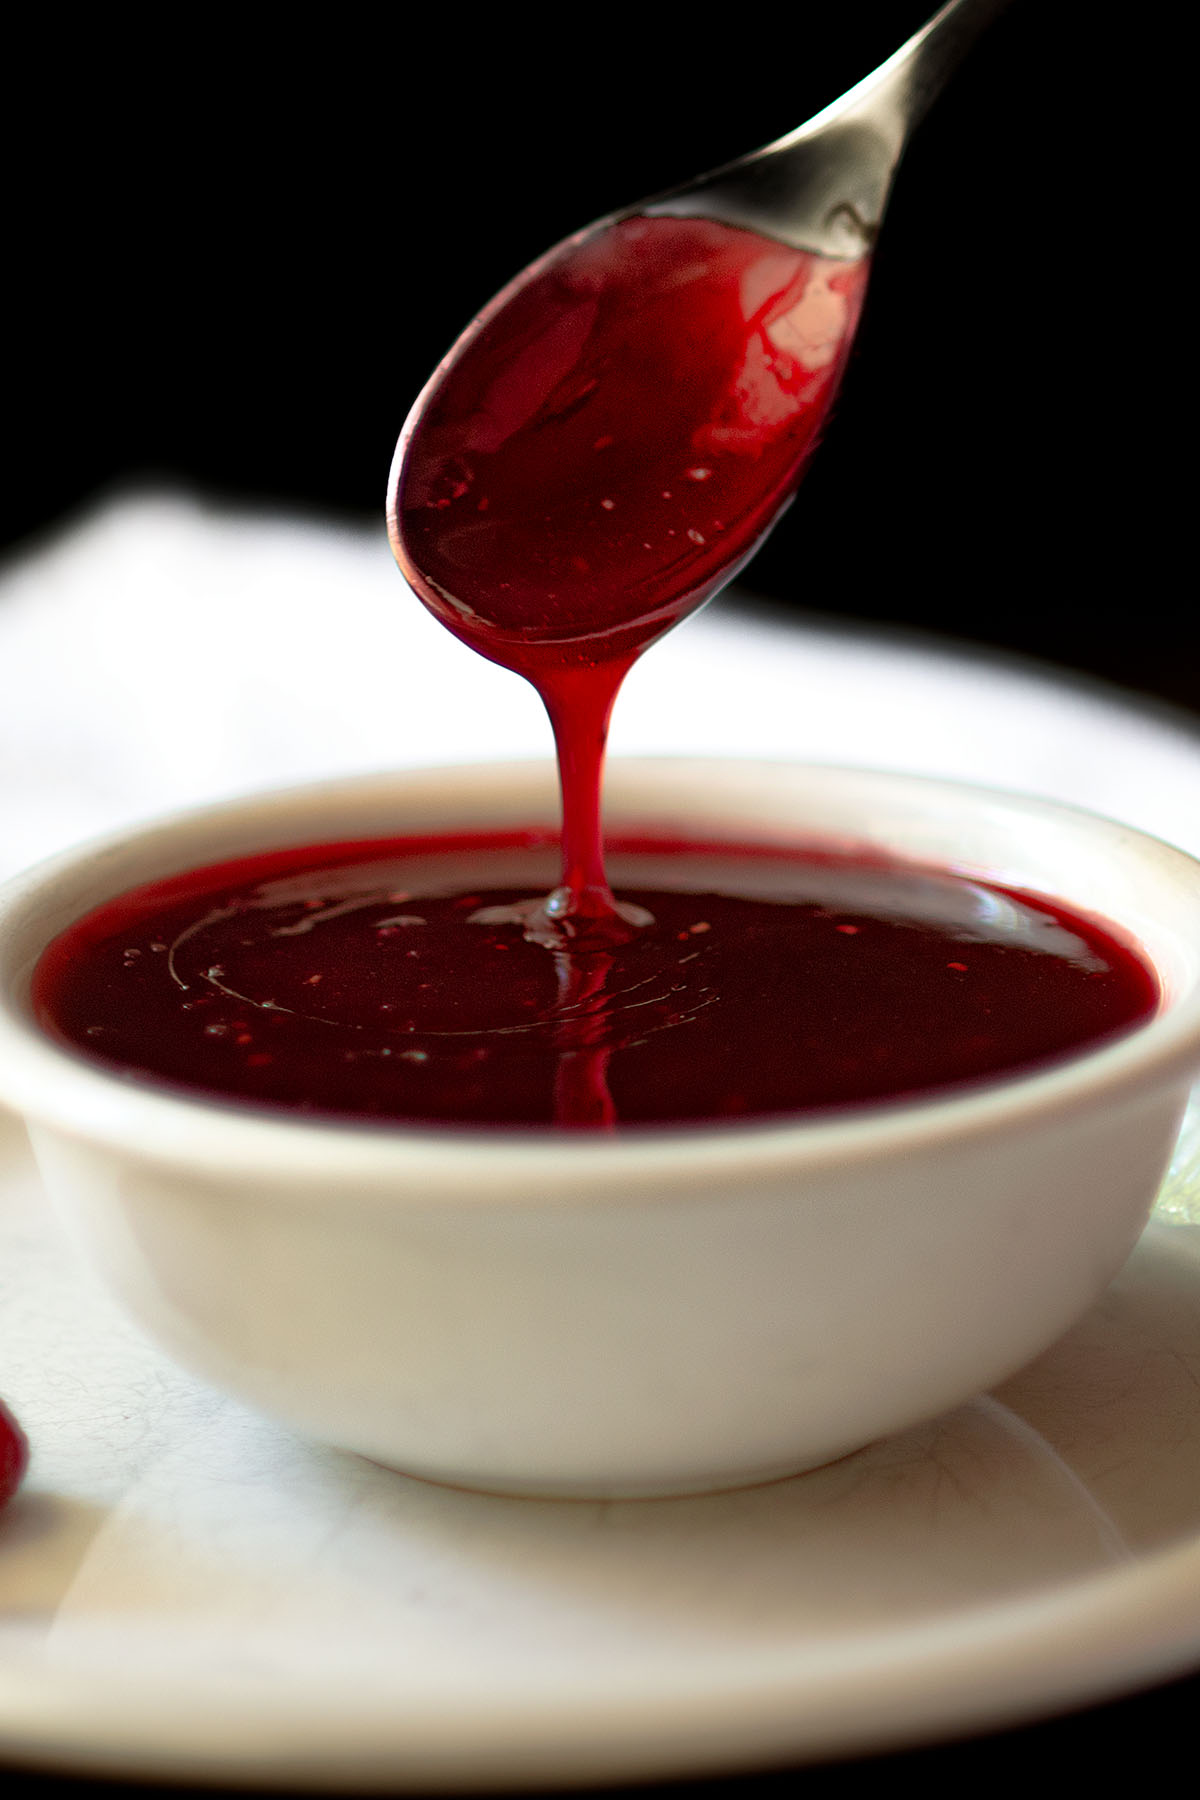 Raspberry dipping sauce being spooned into a bowl.